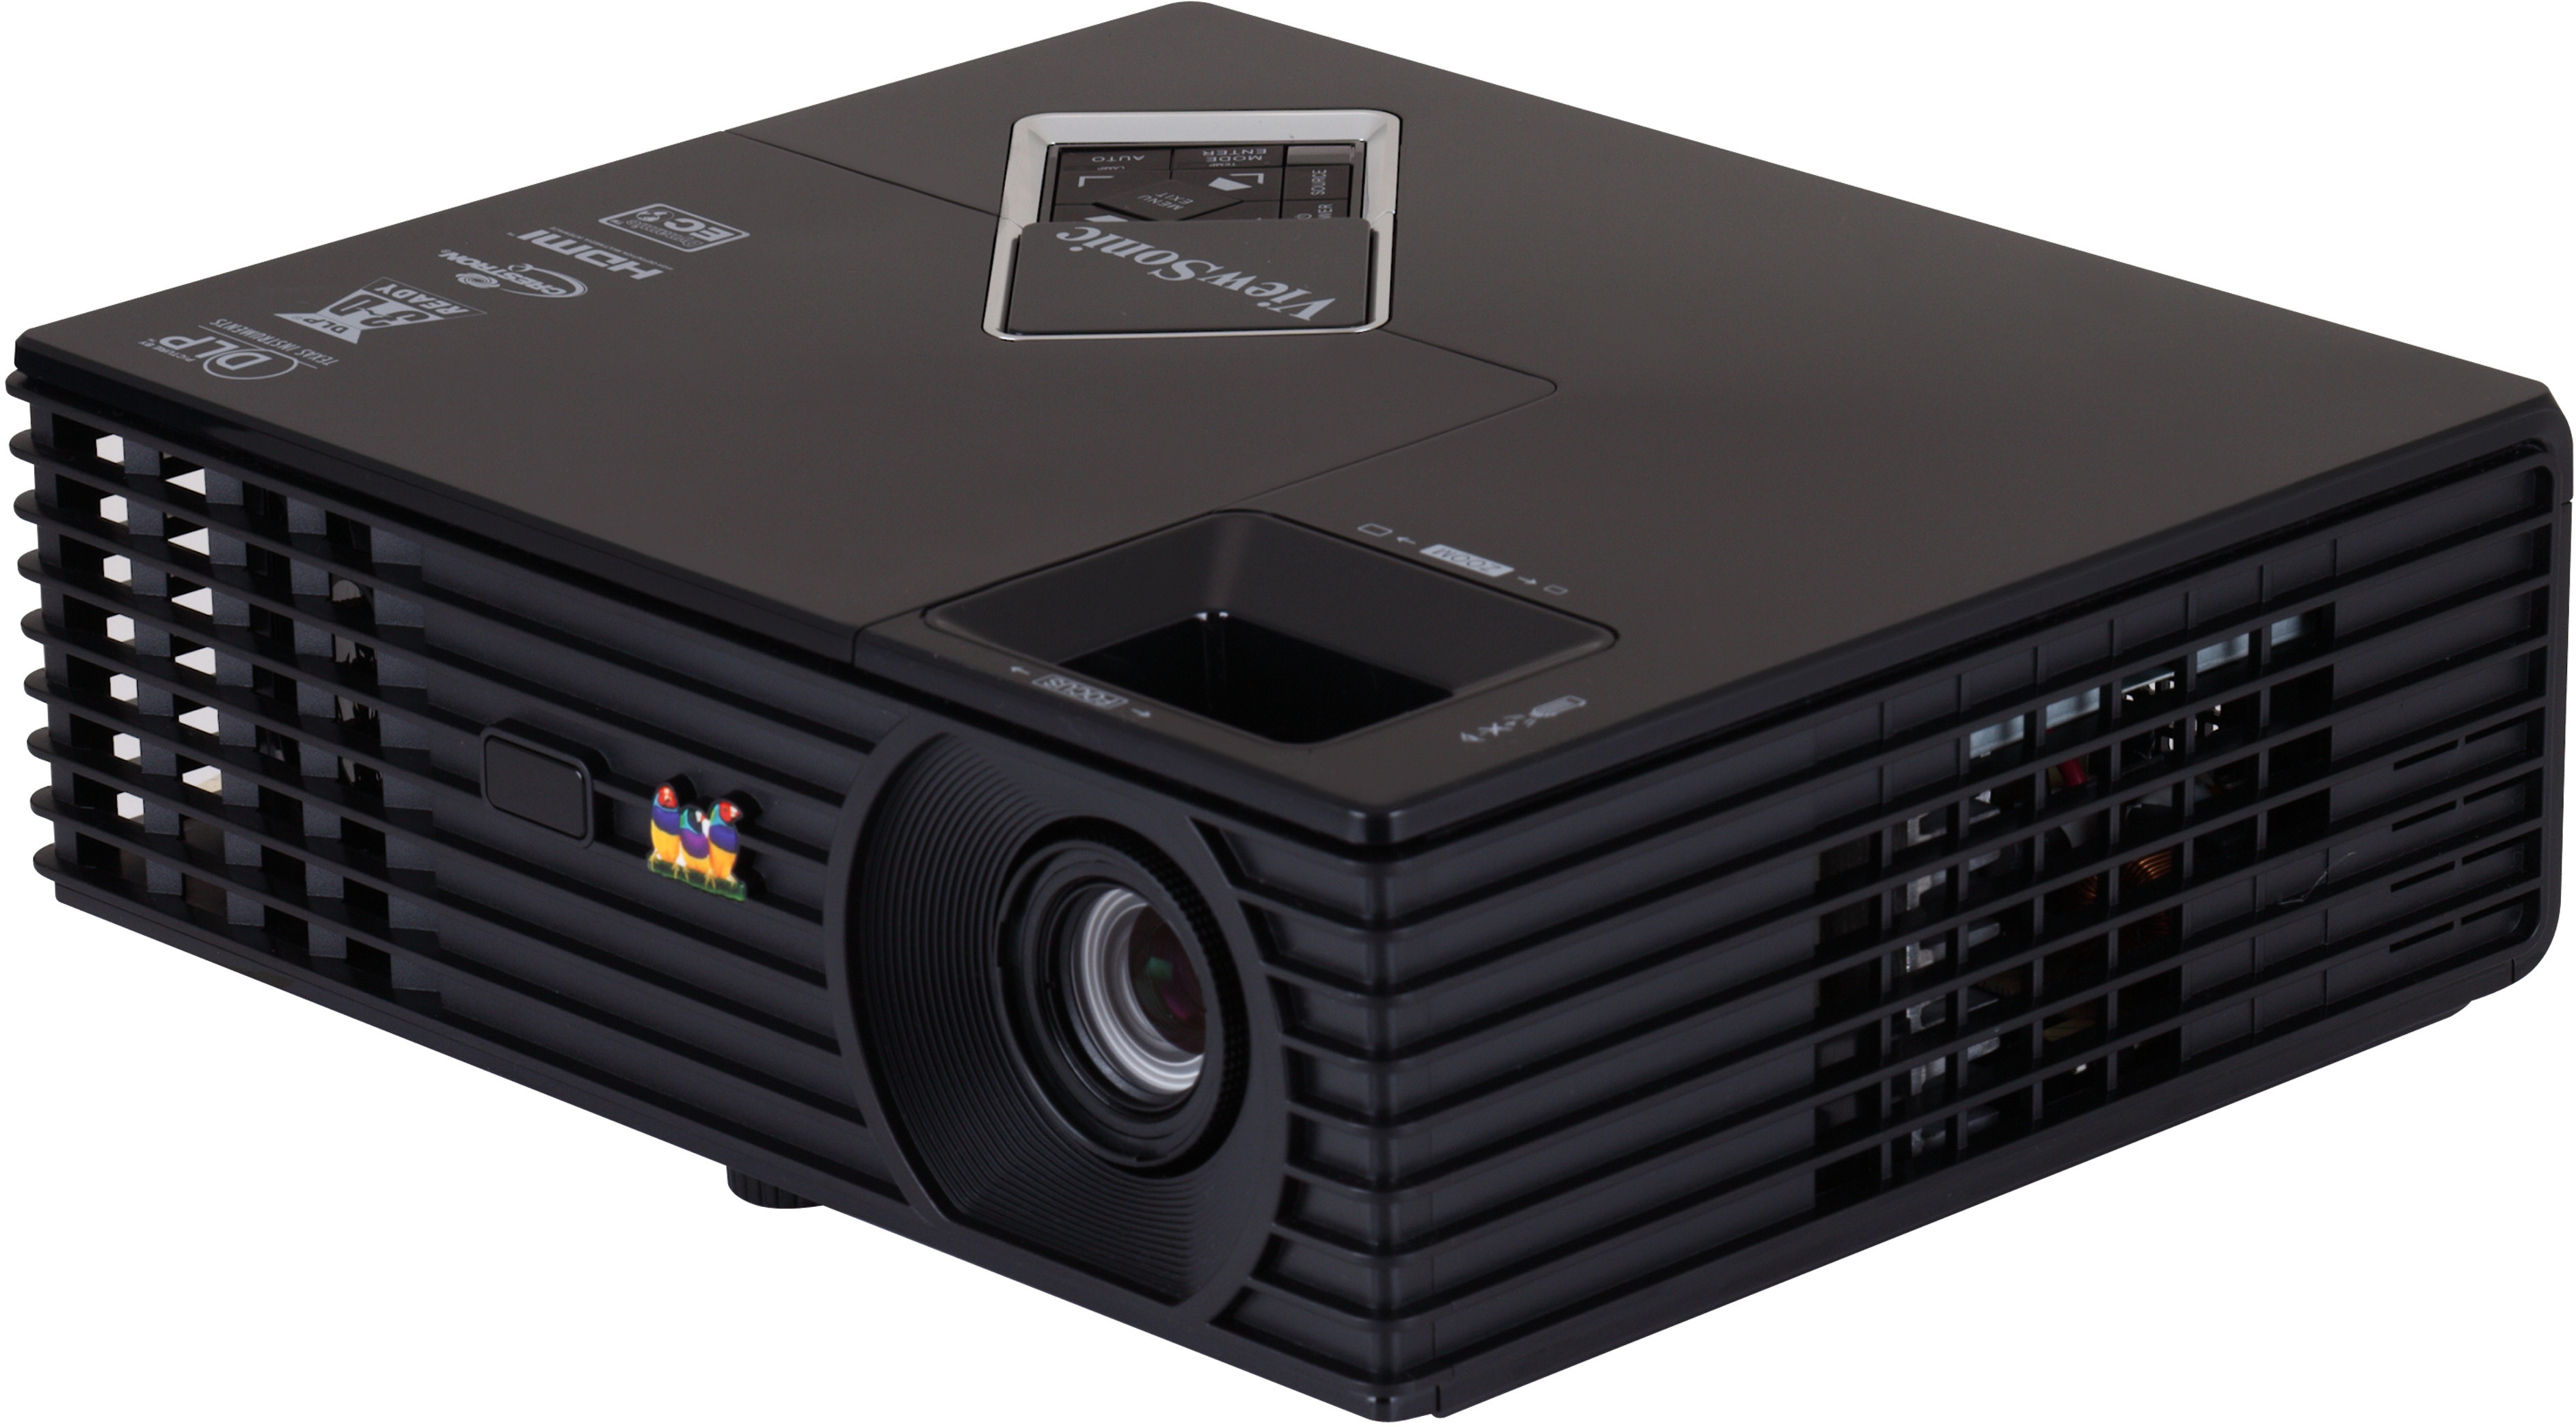 Viewsonic Pjd6245 Networkable Projector For More Efficient And Effective Management